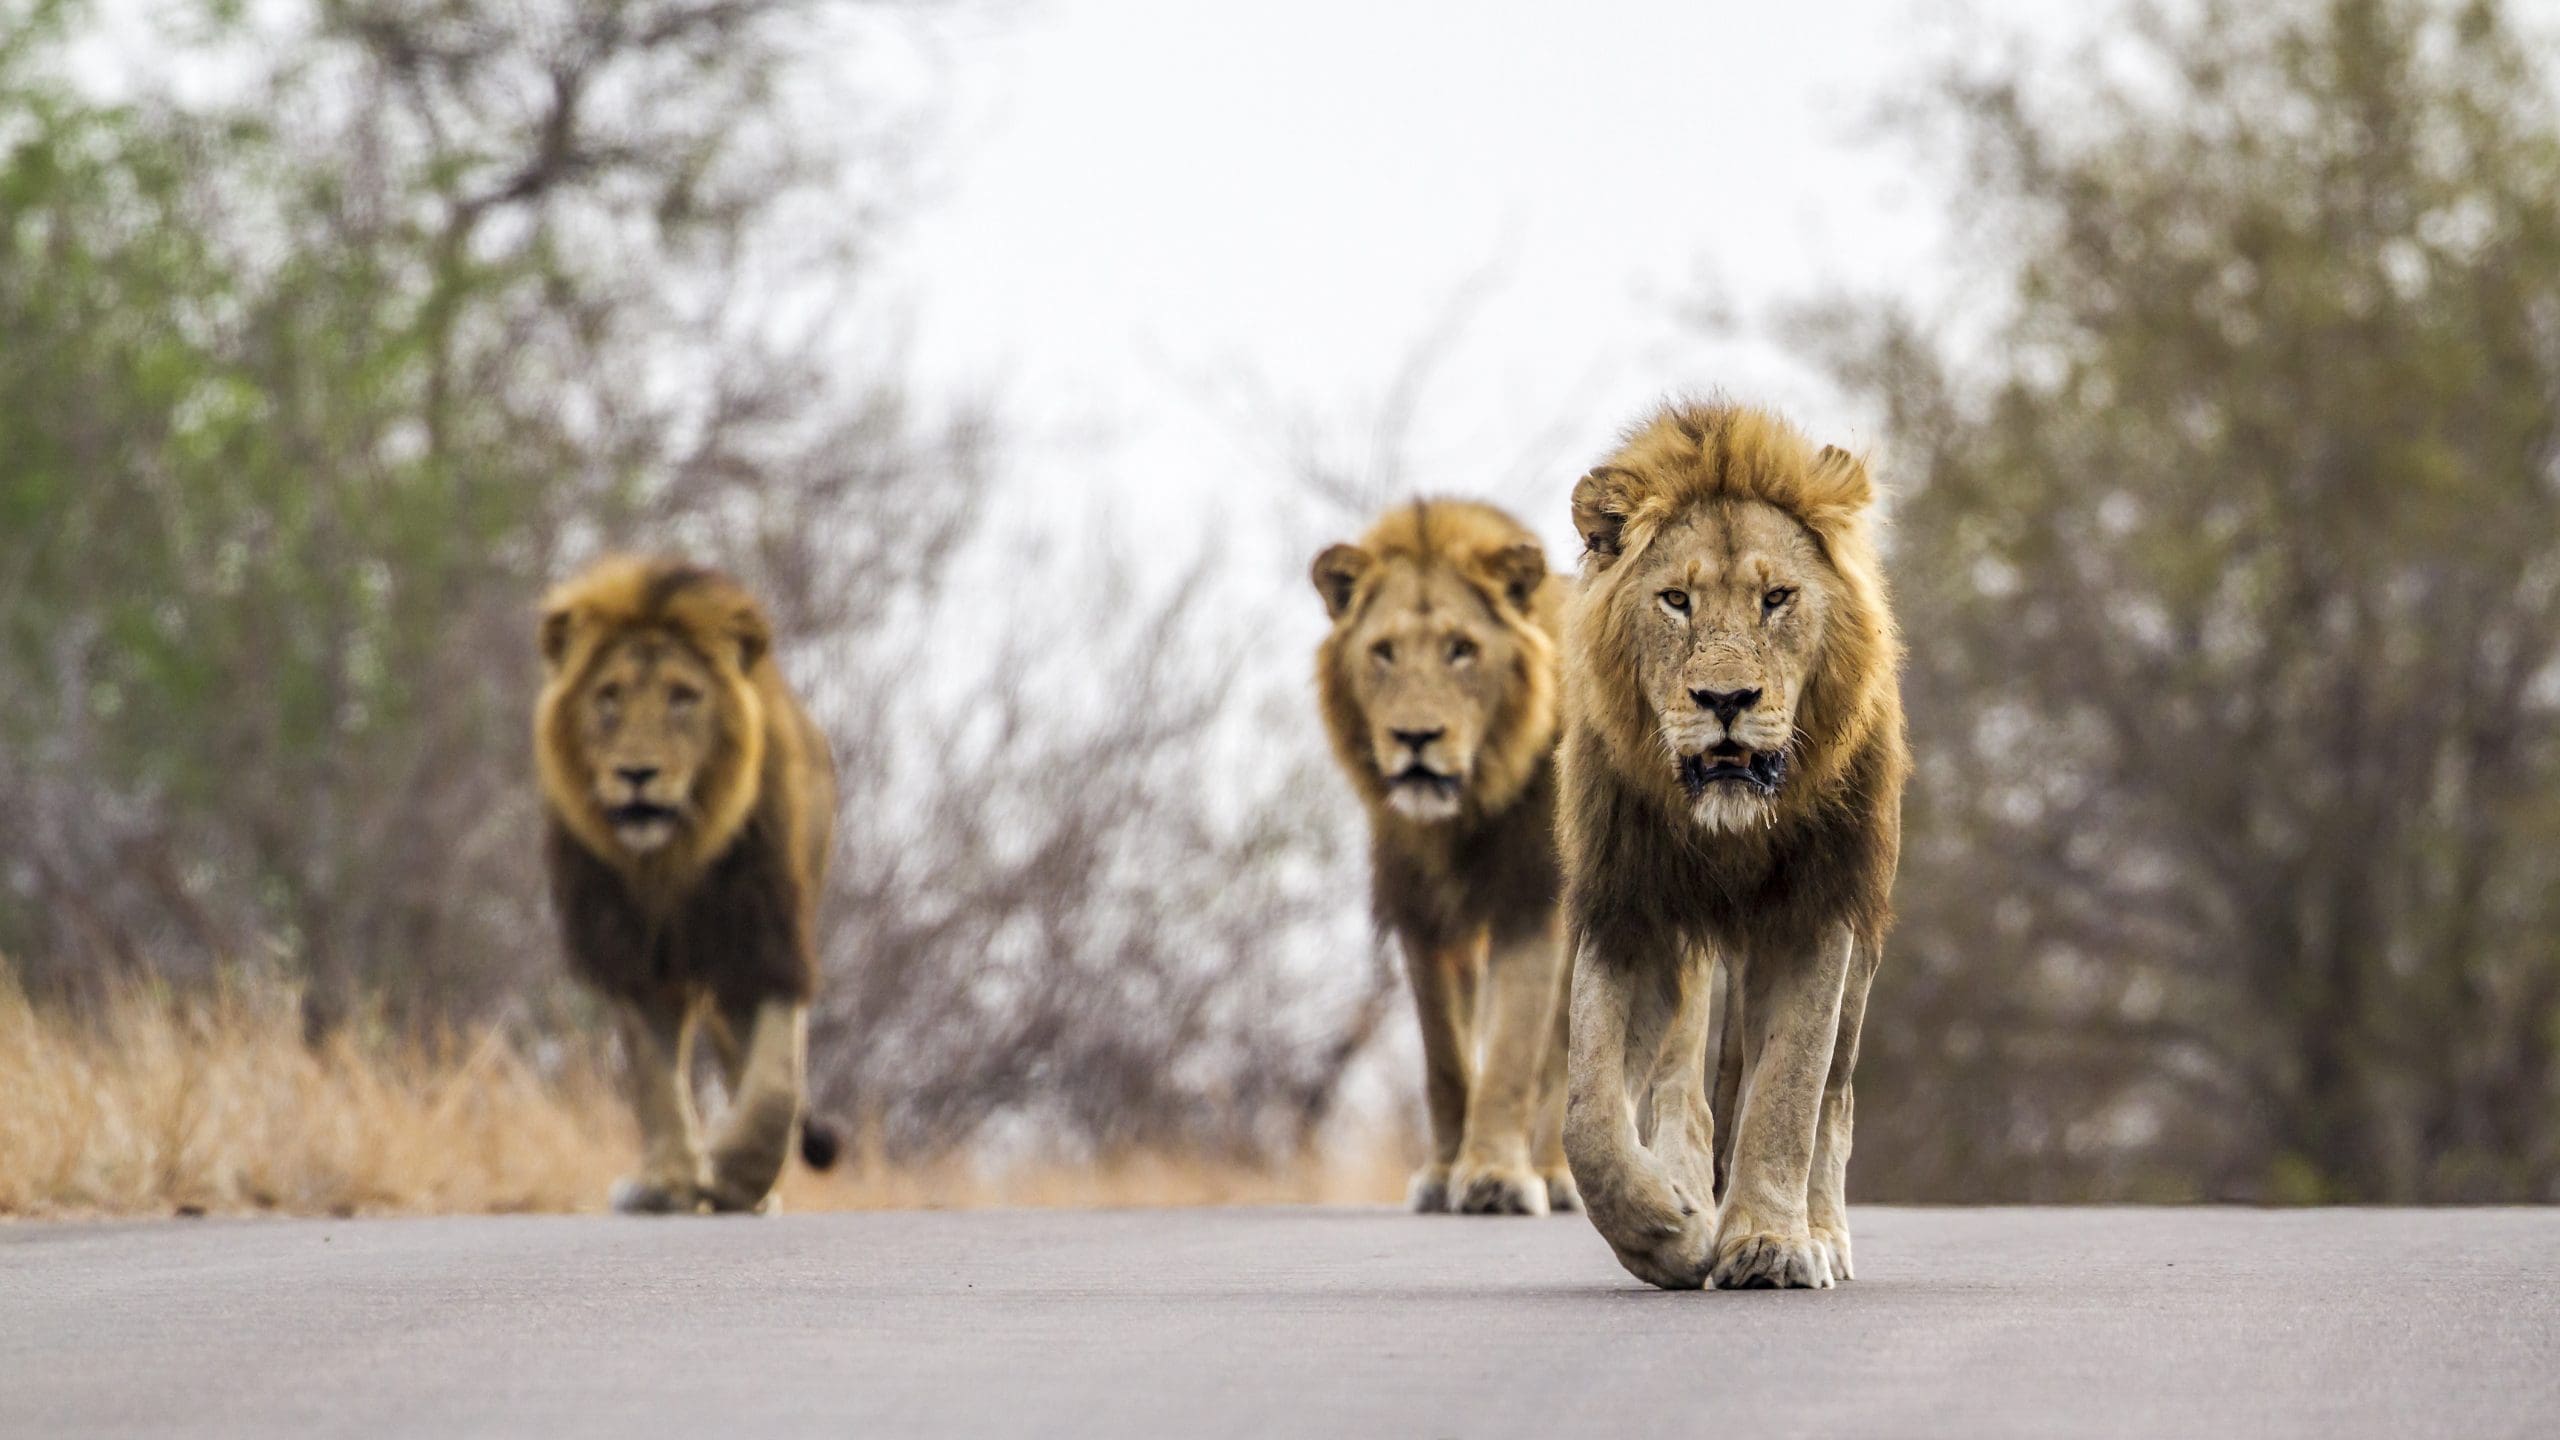 10 animals to look for in kruger national park